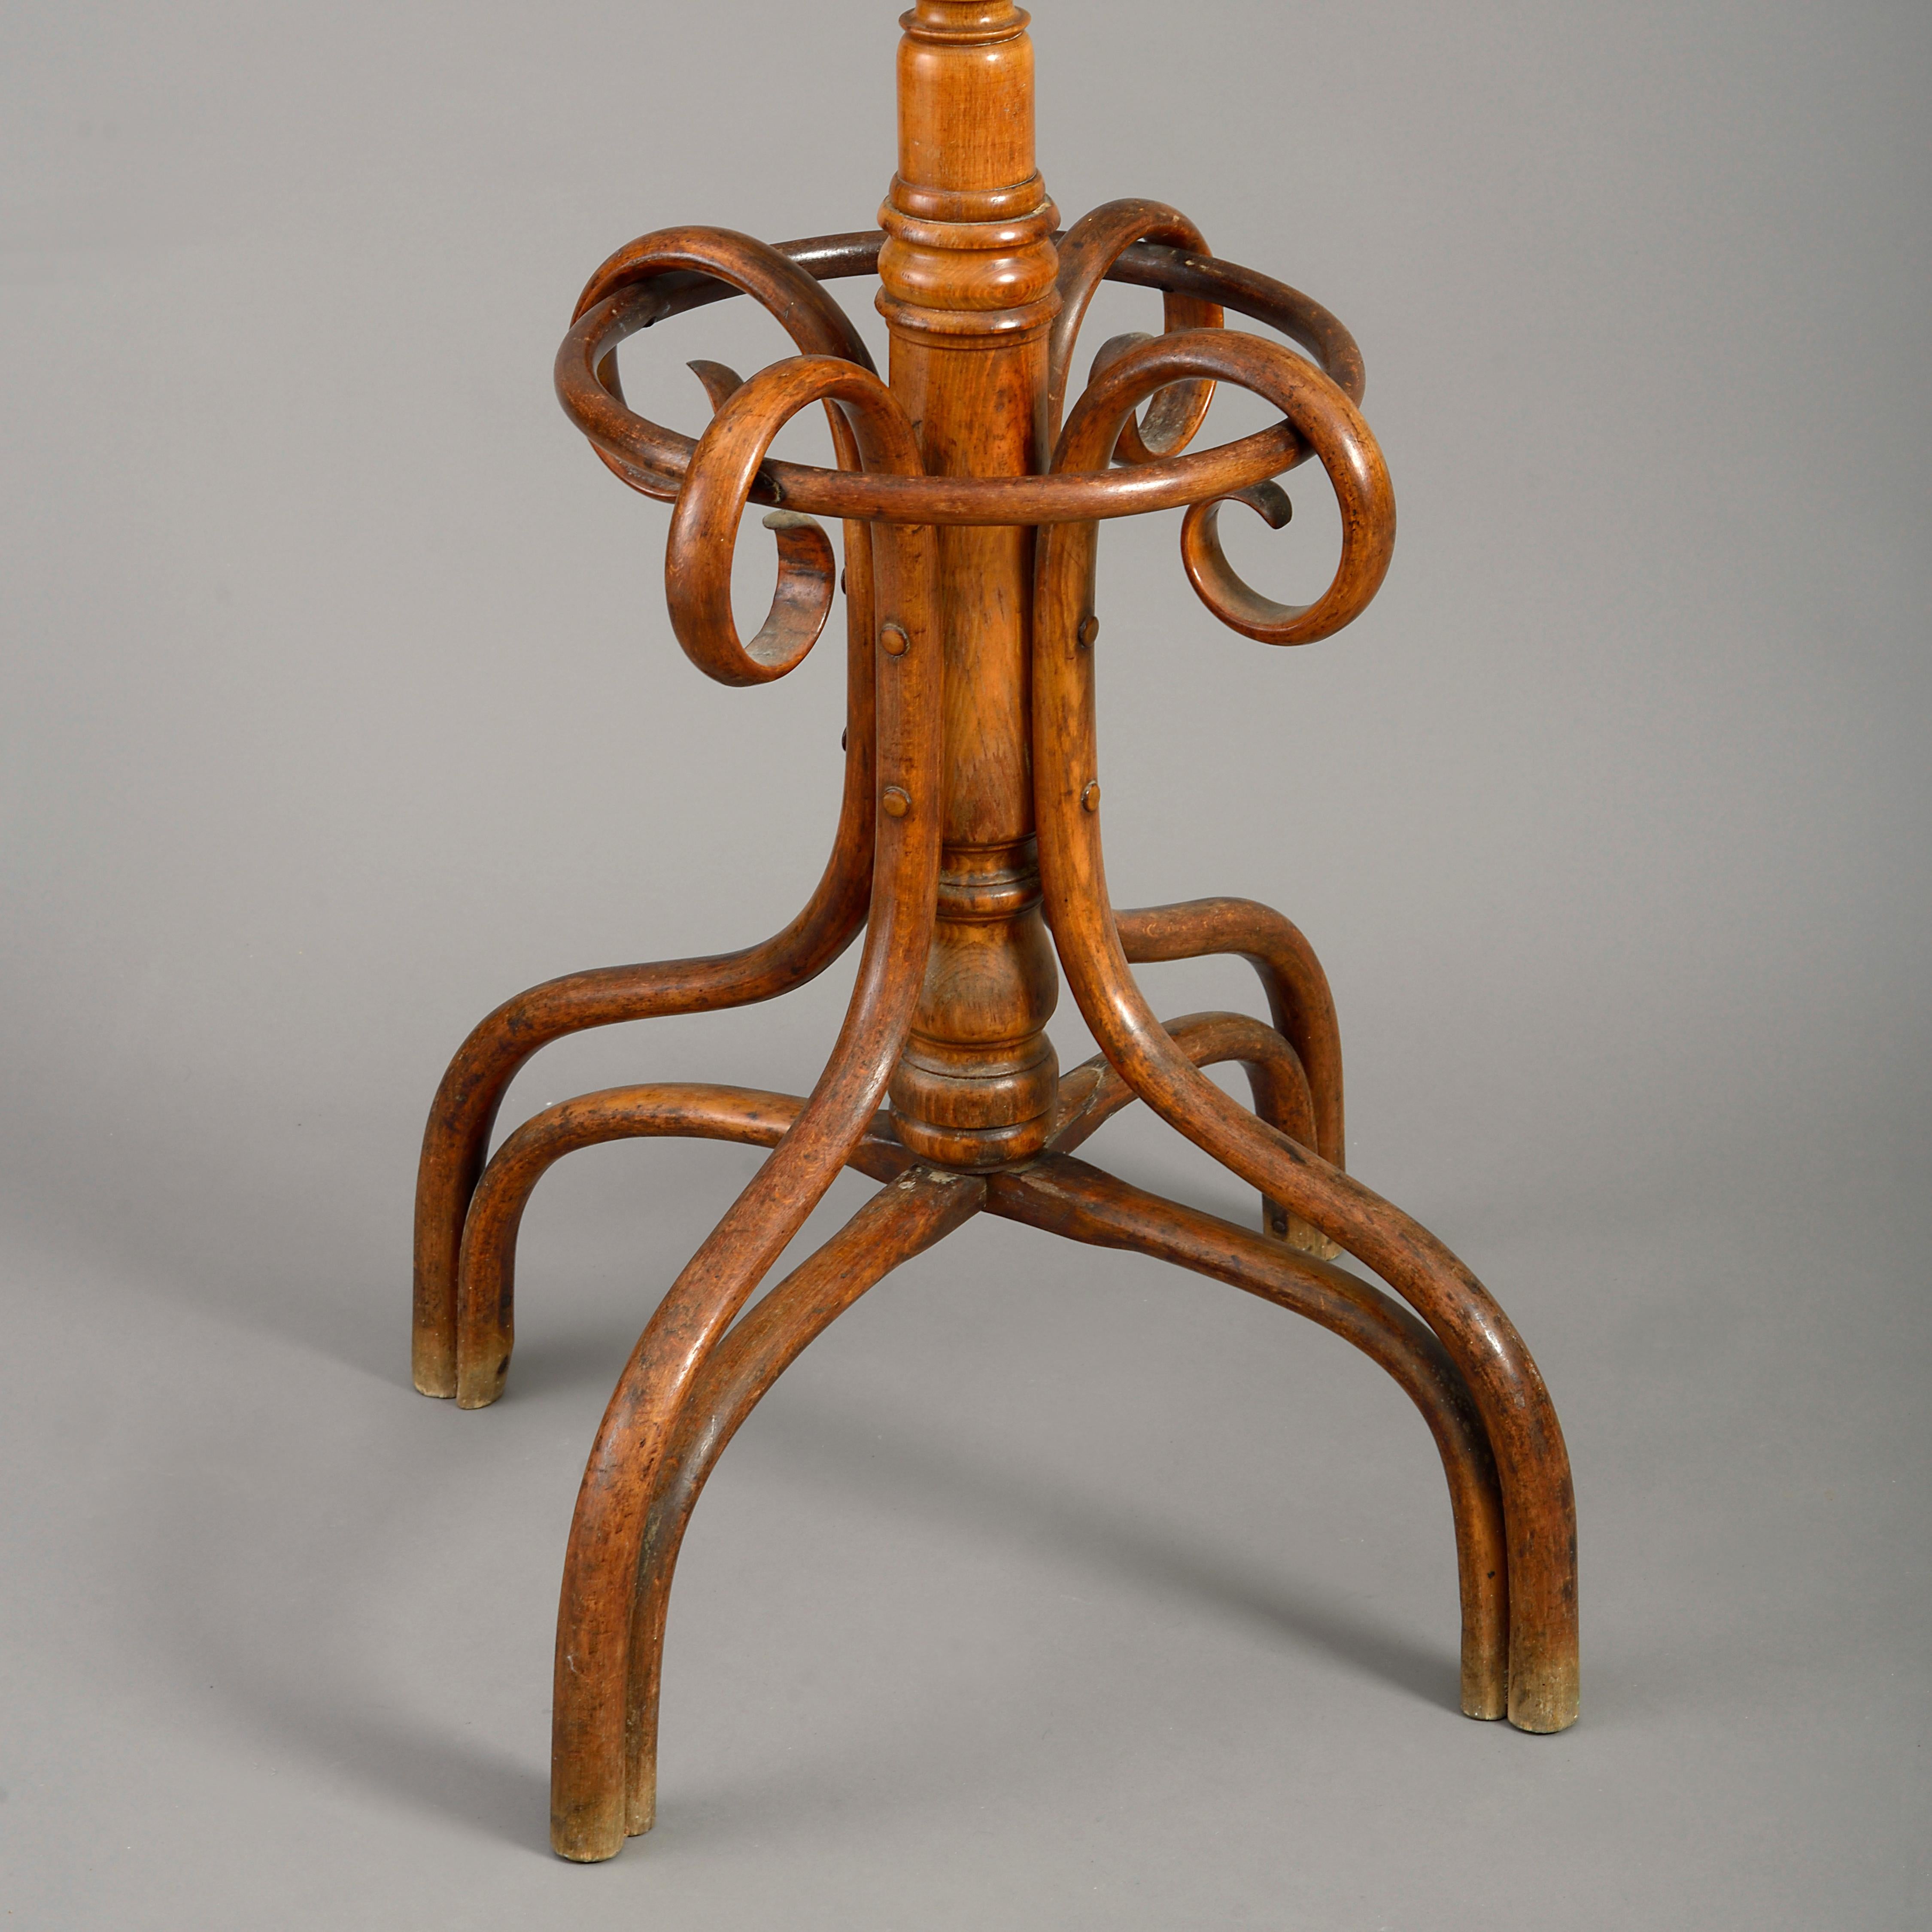 Aesthetic Movement 19th Century Bentwood Hat and Coat Stand Attributed to Thonet